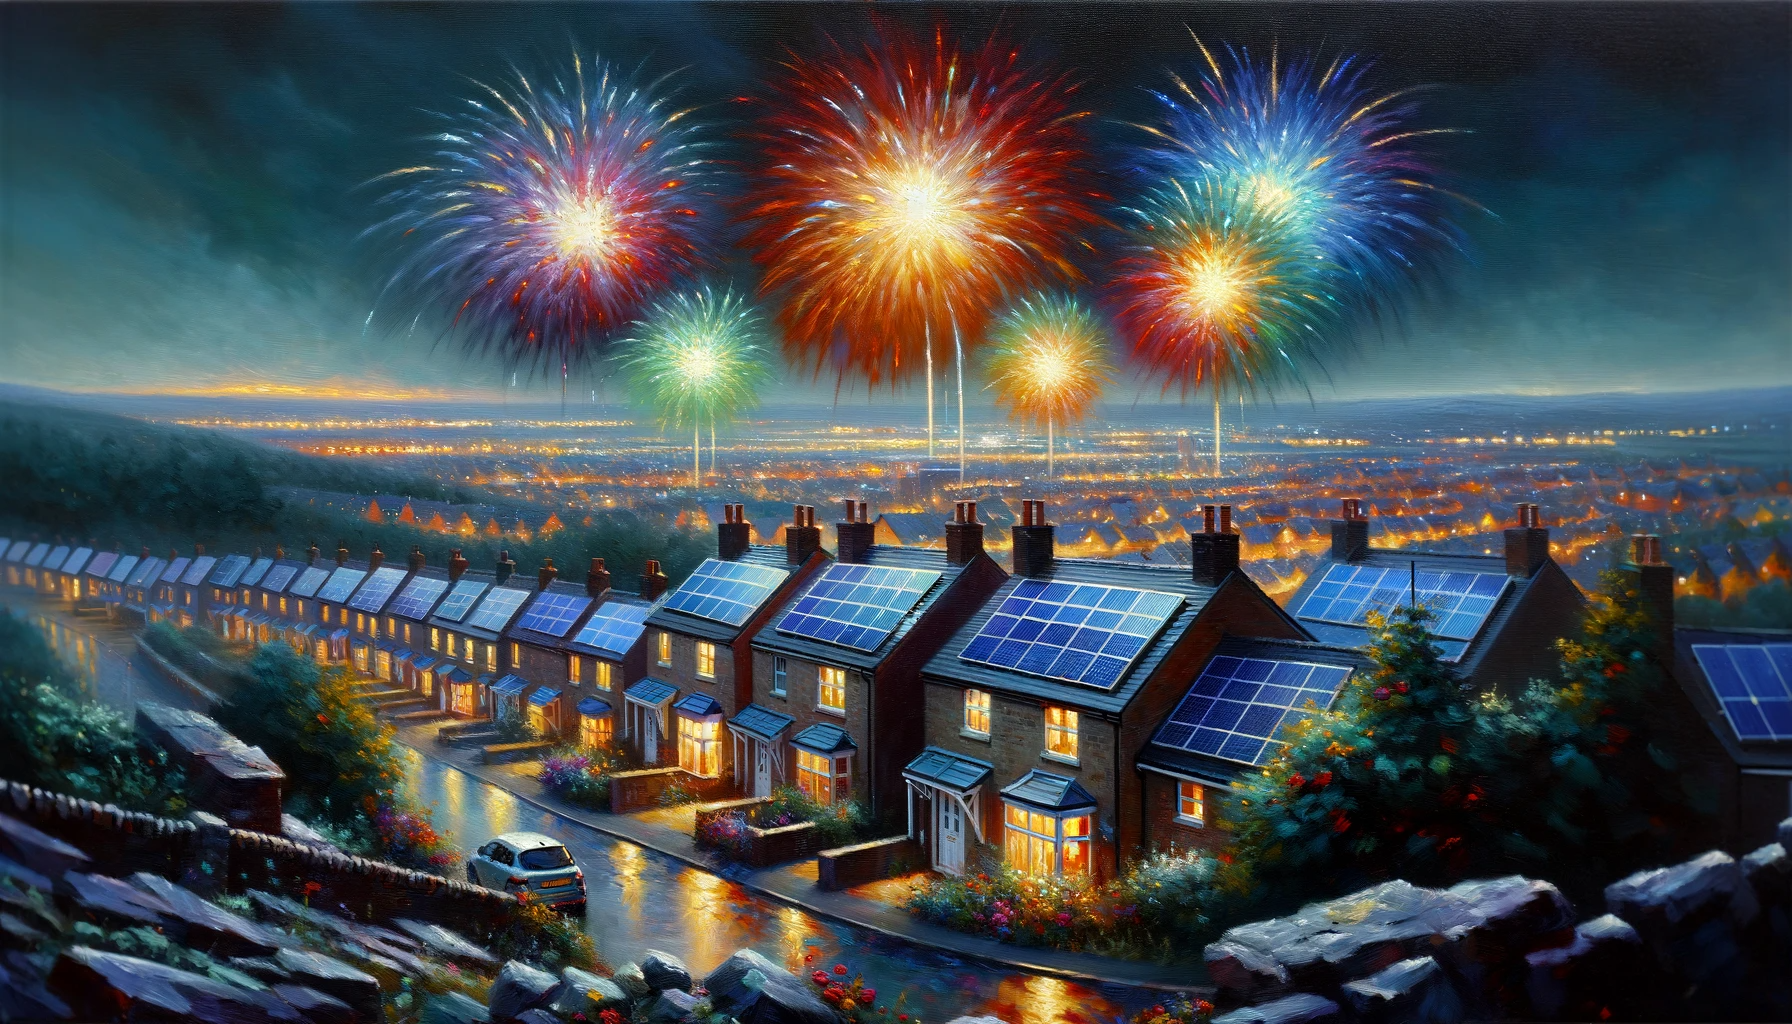 A British Neighbourhood with solar panels on the rooves. Fireworks go off in the background to bring in the new year